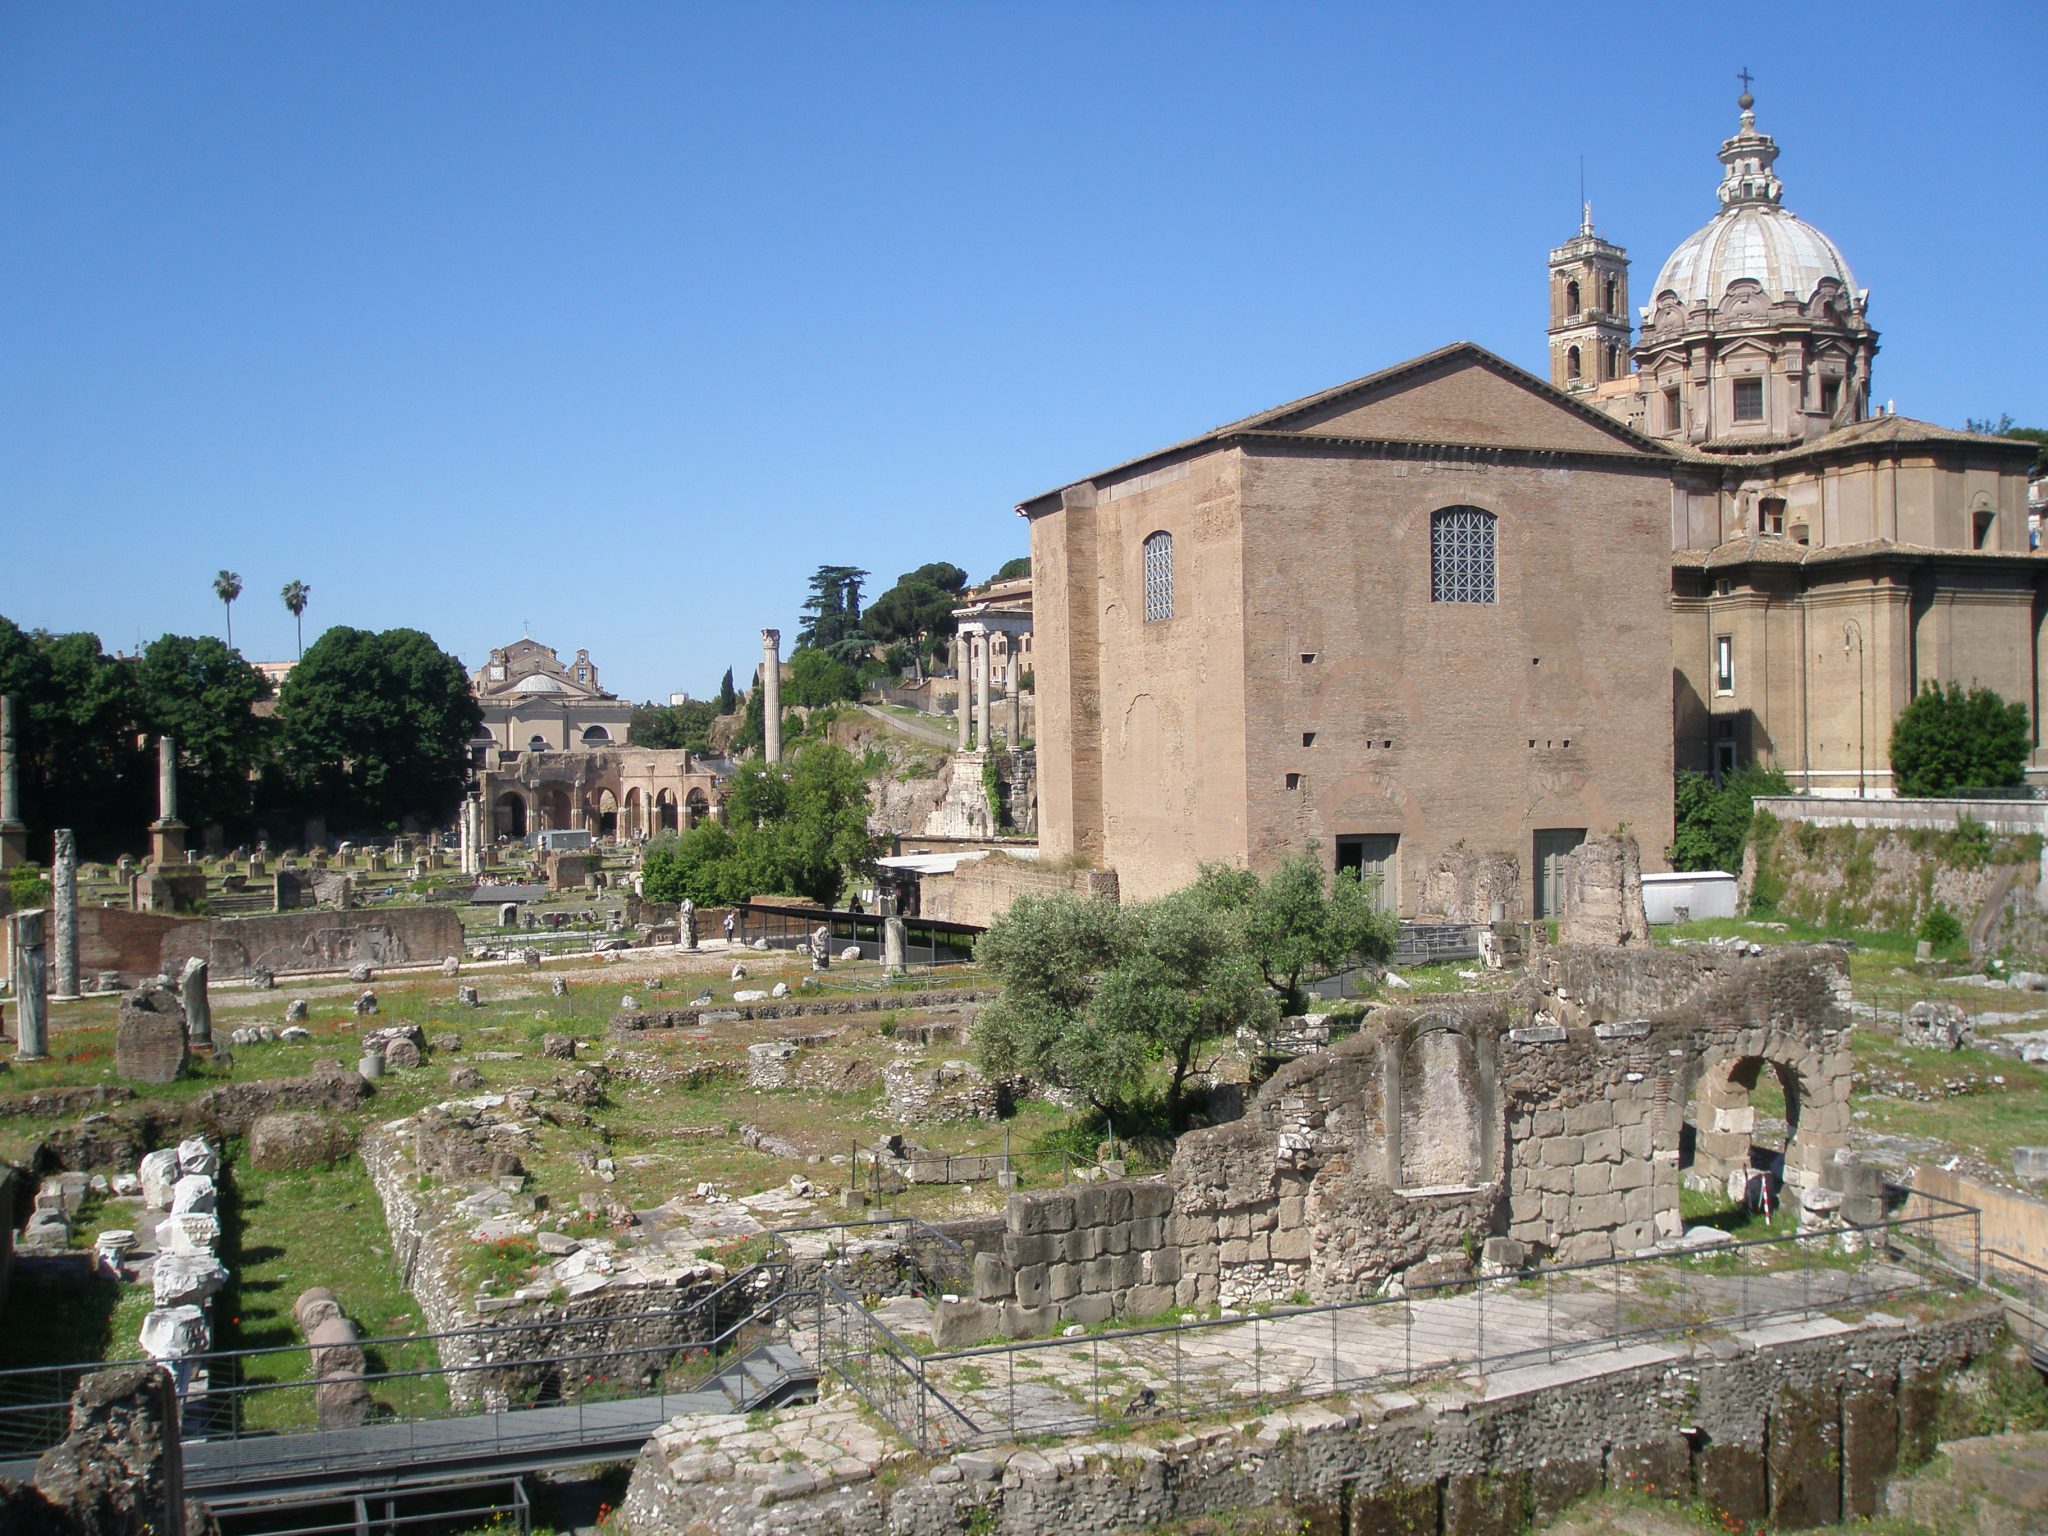 My view of the Curia (to the right) and the site of the Basilica Aemilia (to the left), as seen from the sidewalk along Via del Fori Imperiali.